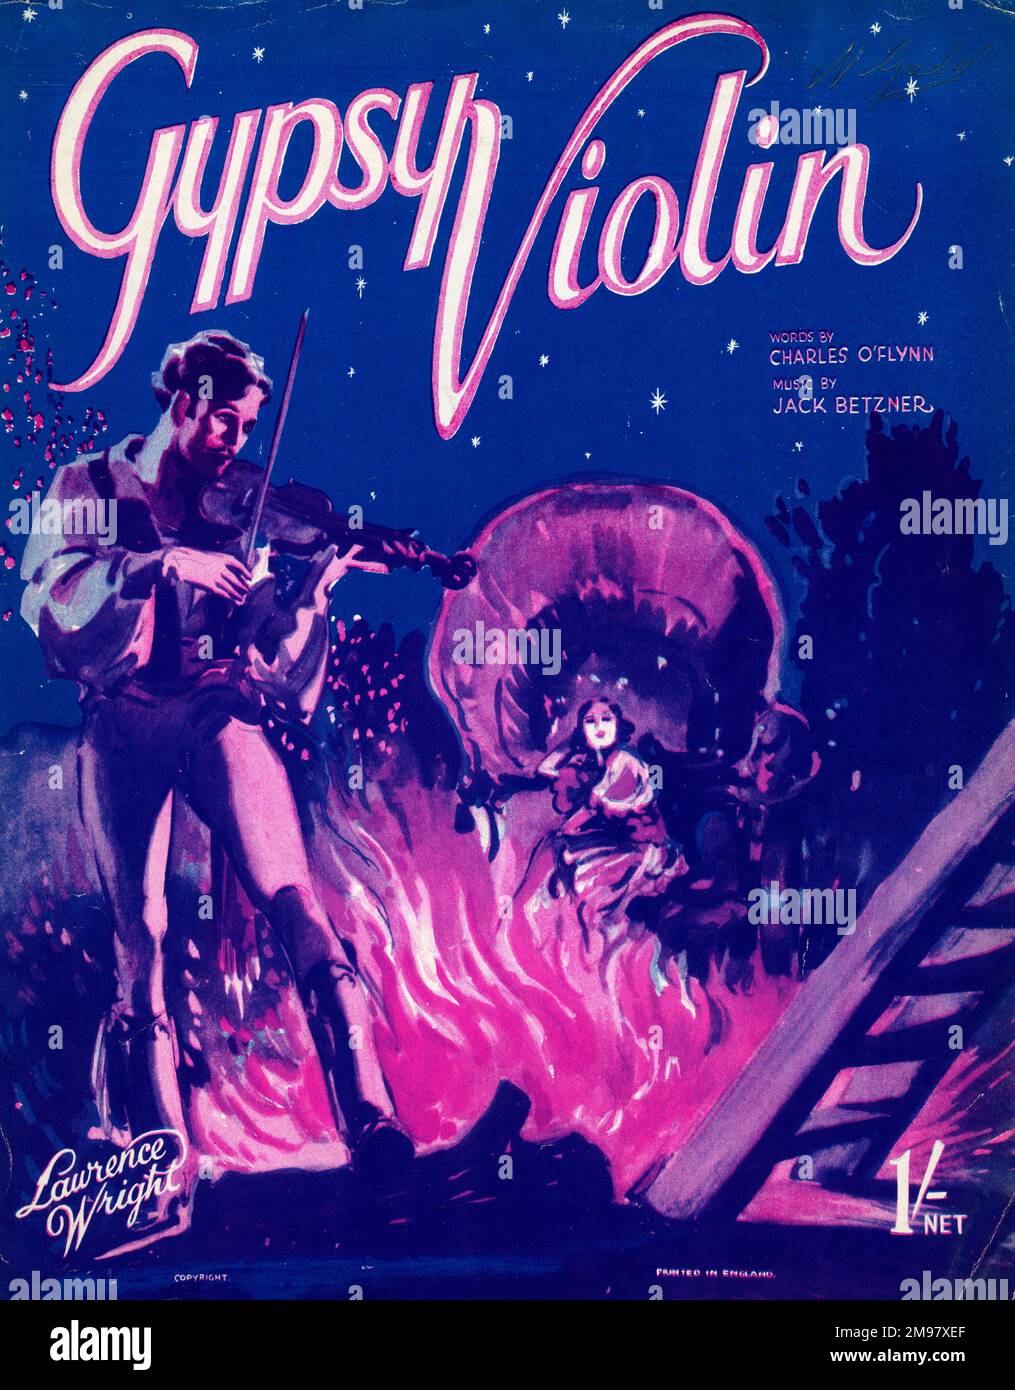 Music cover, Gypsy Violin, words by Charles O'Flynn, music by Jack Betzner. Stock Photo